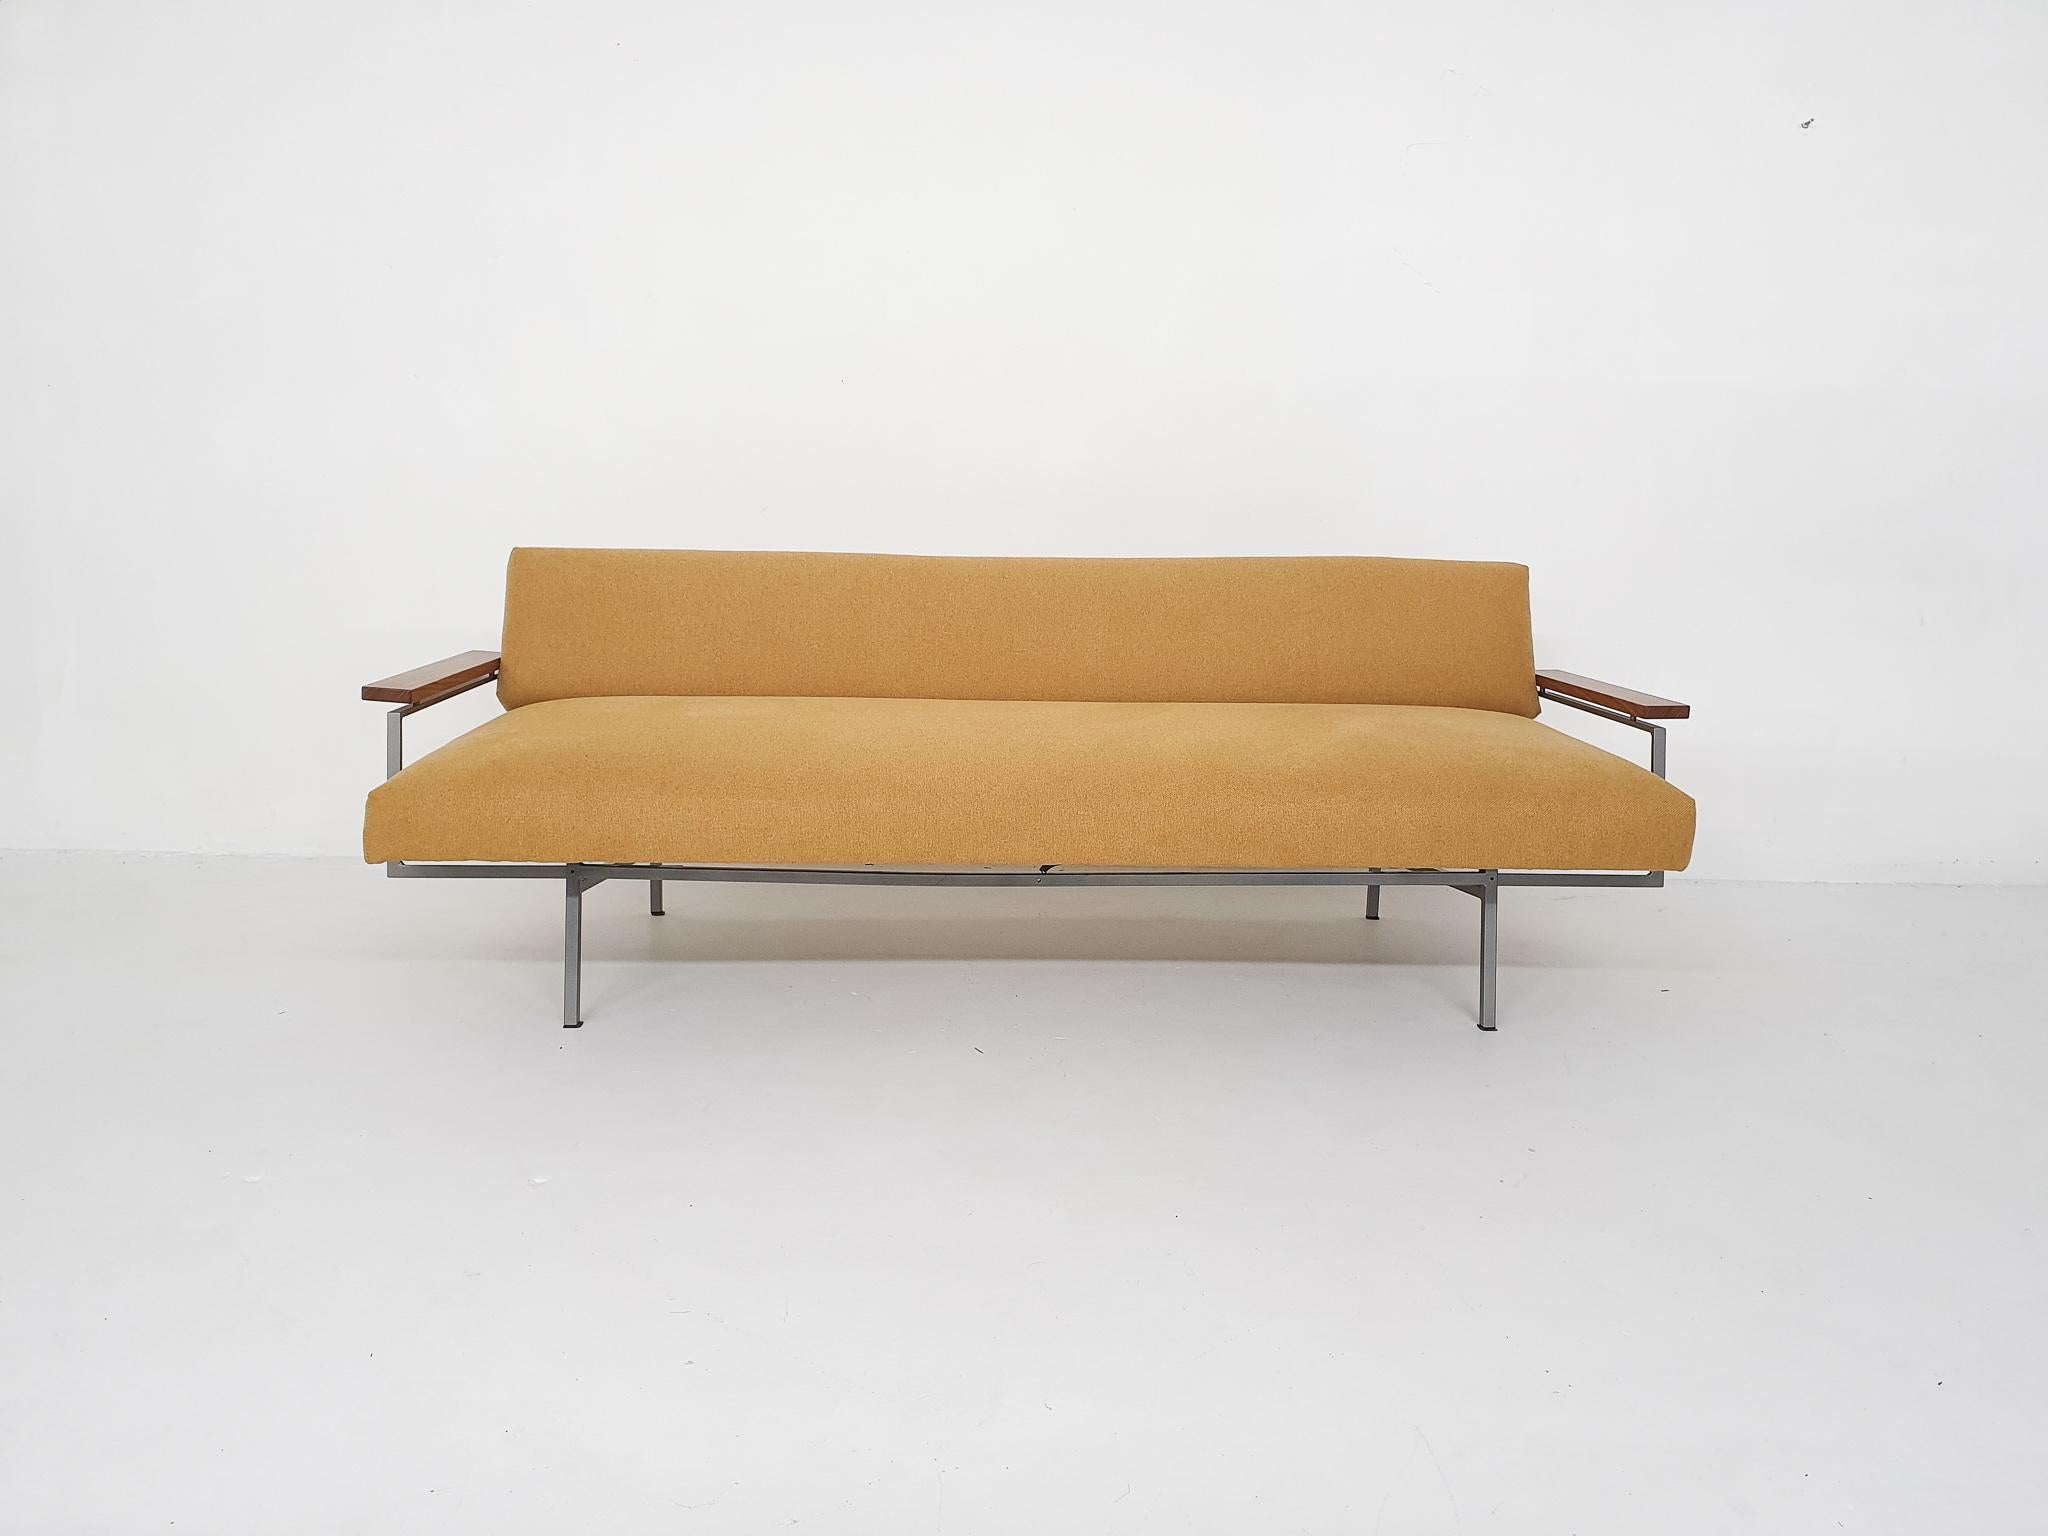 Mid-century sofa with new ochre upholstery and filling. The seating can be pulled to the front to create a 1 person bed, the dimensions of the bed are: 185 x 70 cm
Designed by Rob Parry for Gederland.
The silver frame and arm rests have been